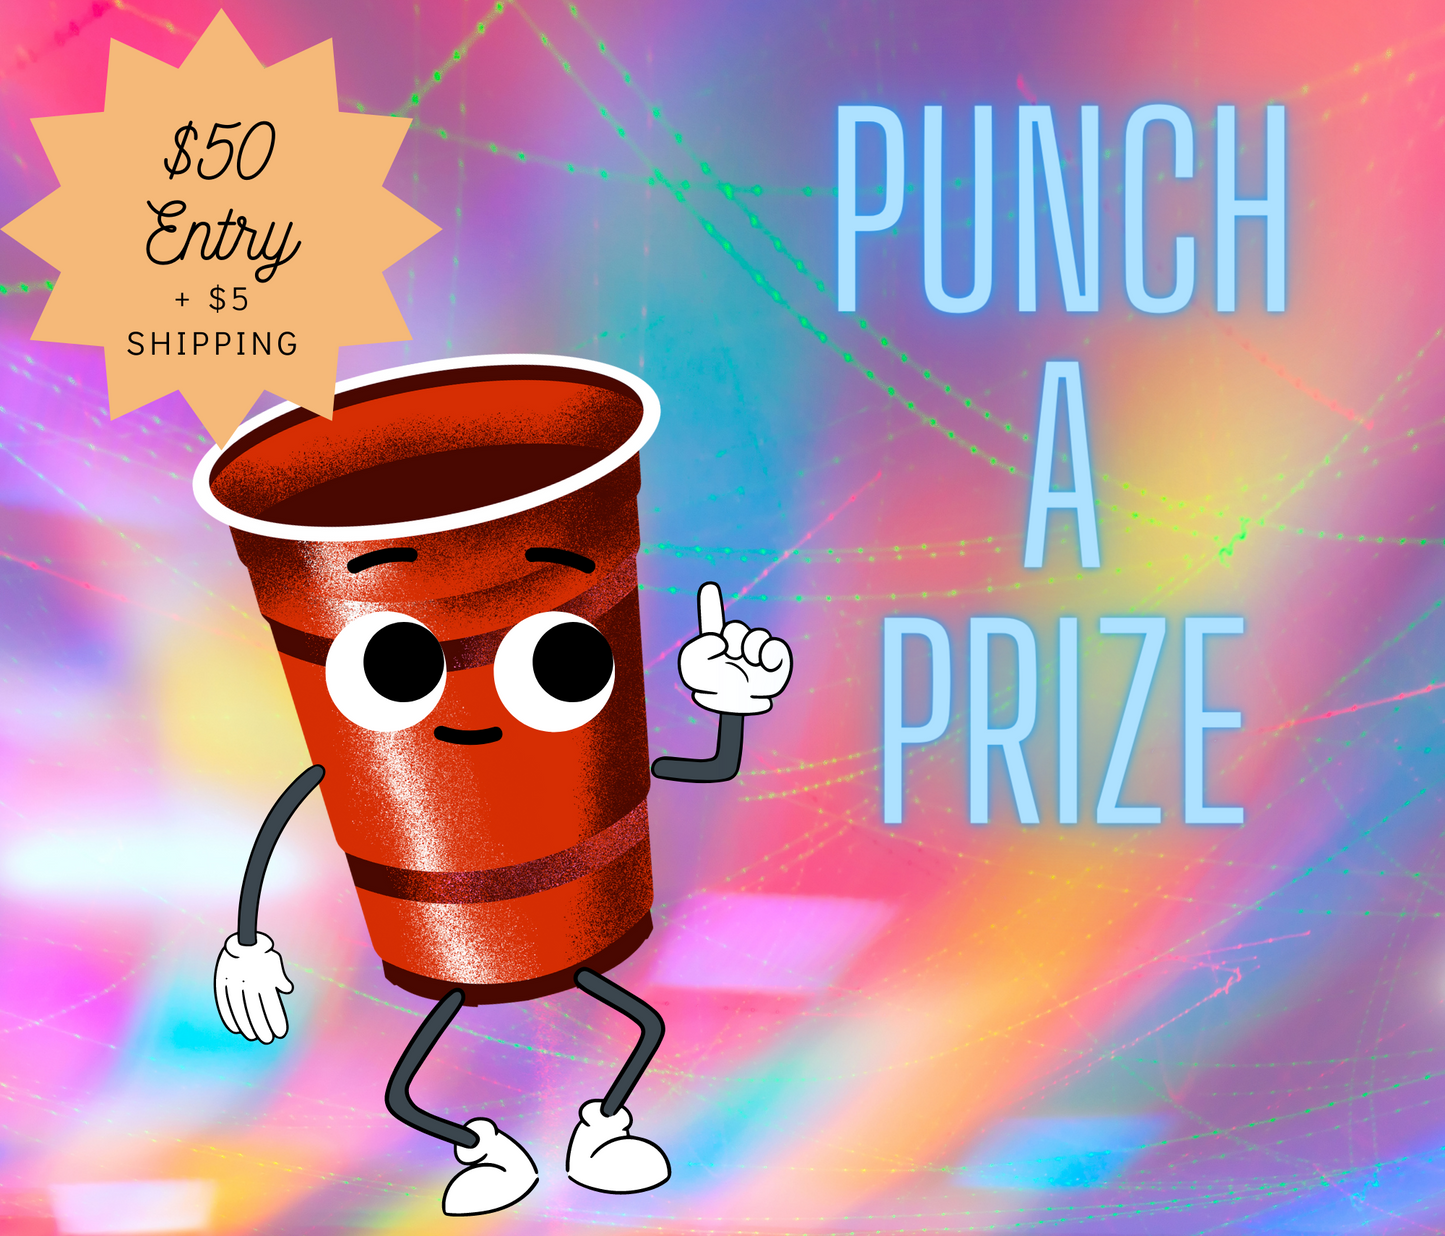 Punch A Prize $50 Entry